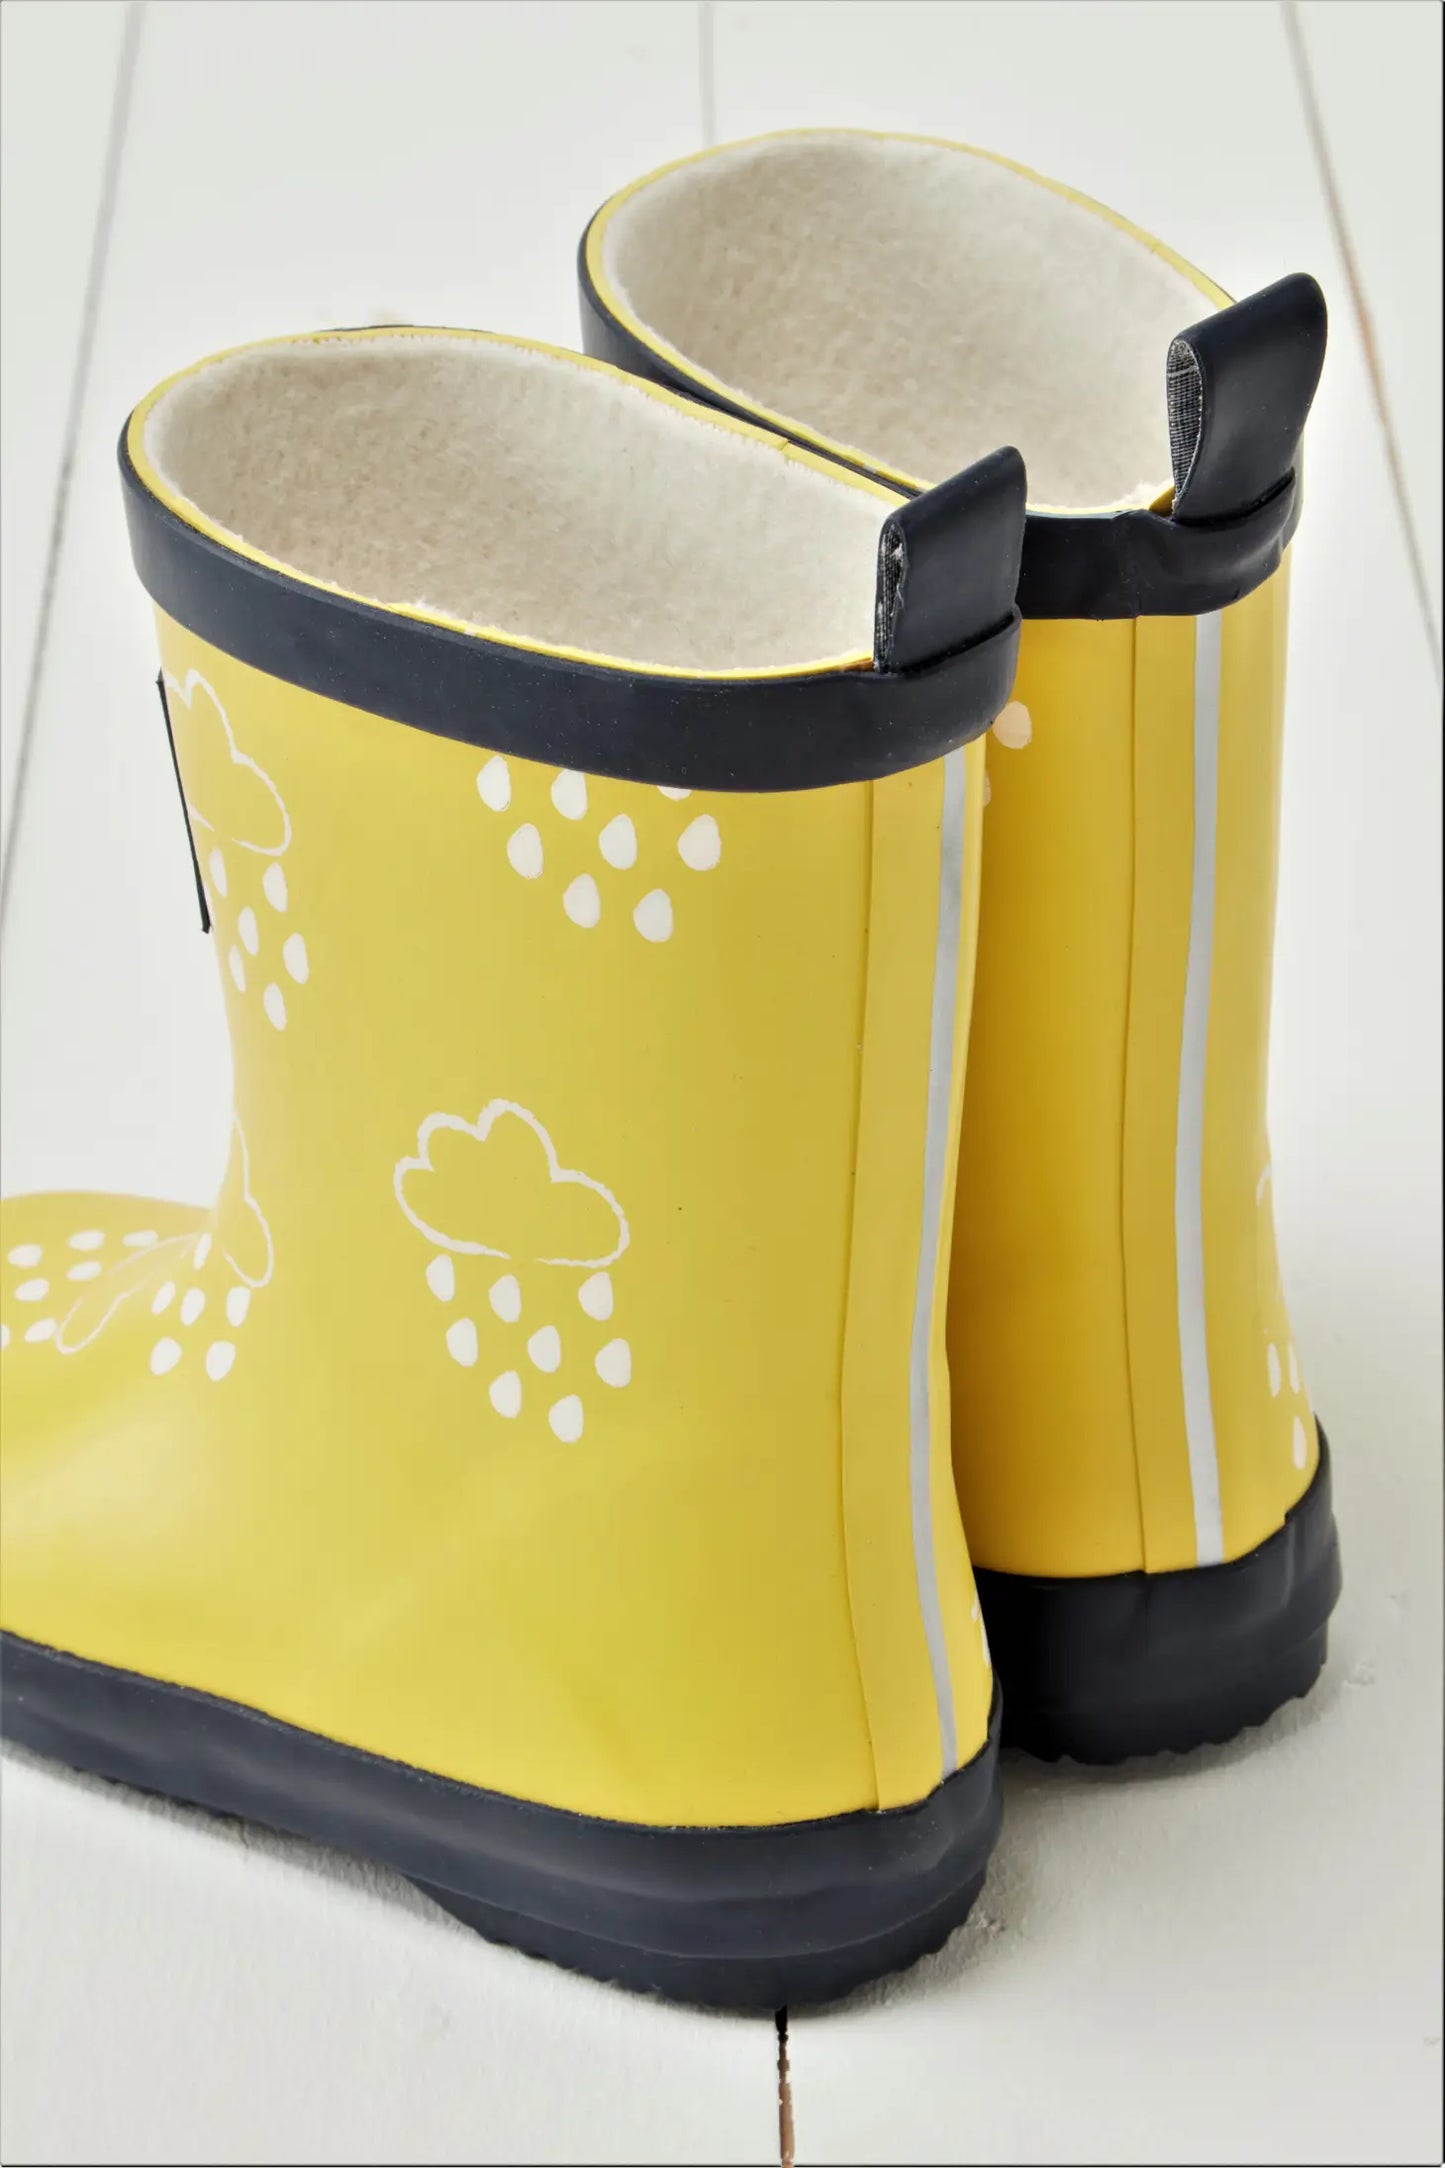 Rubber boots with changing colors, yellow